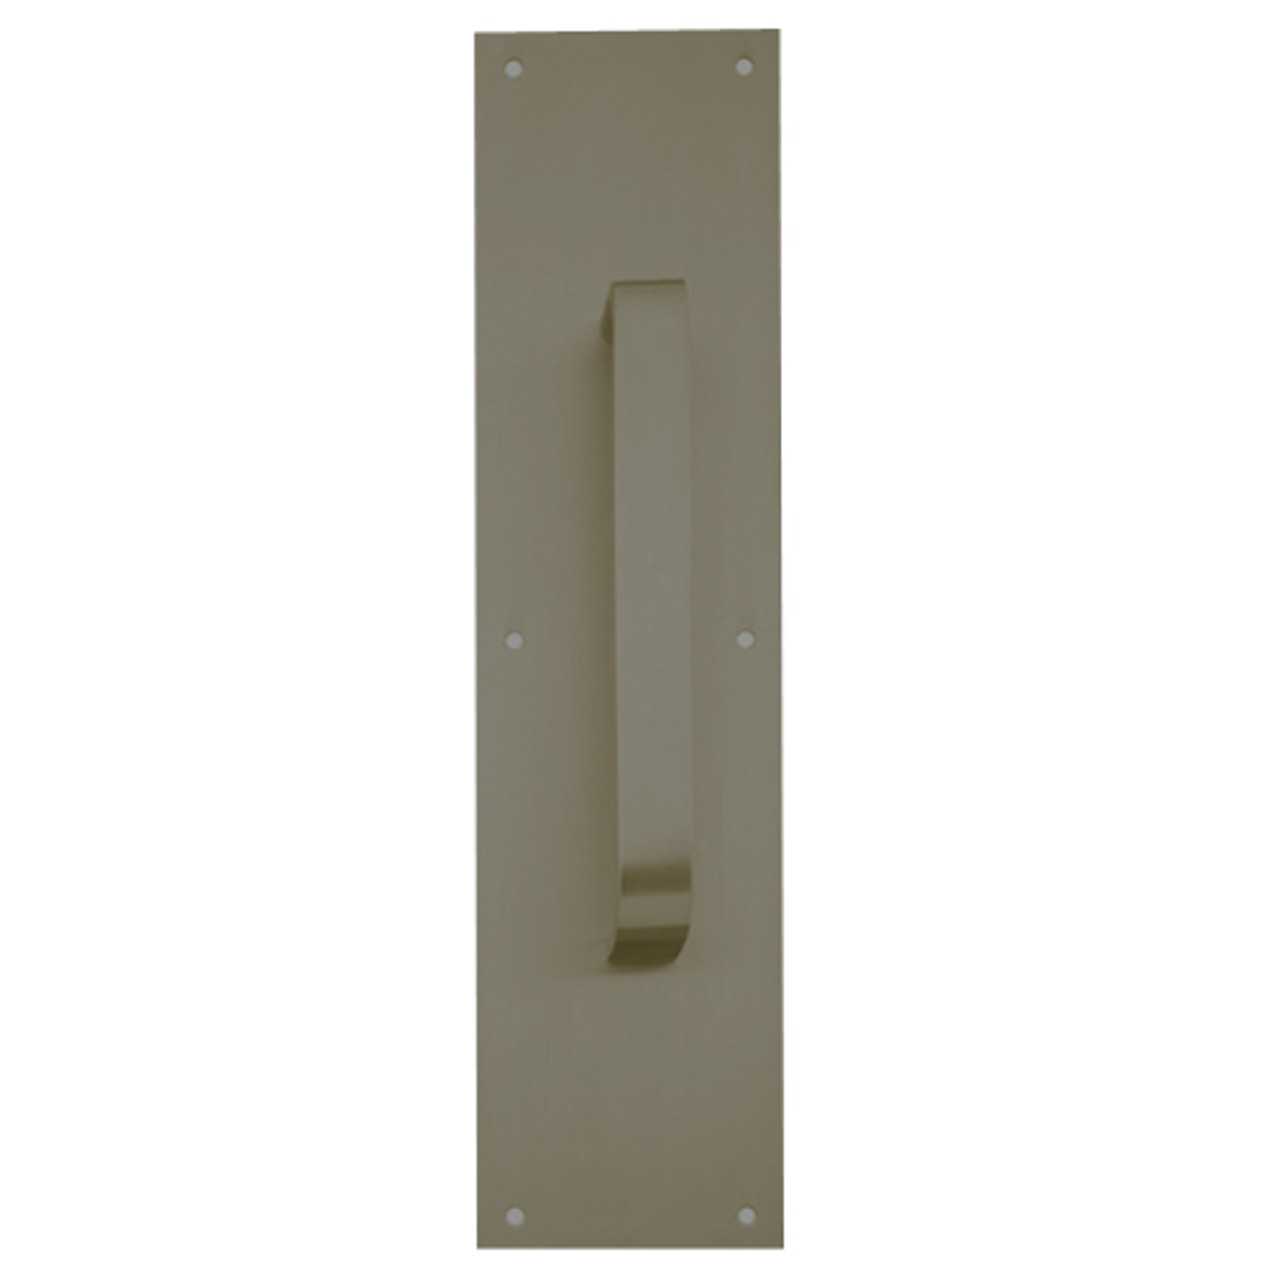 8305-10-US10B-4x16 IVES Architectural Door Trim 4x16 Inch Pull Plate in Oil Rubbed Bronze